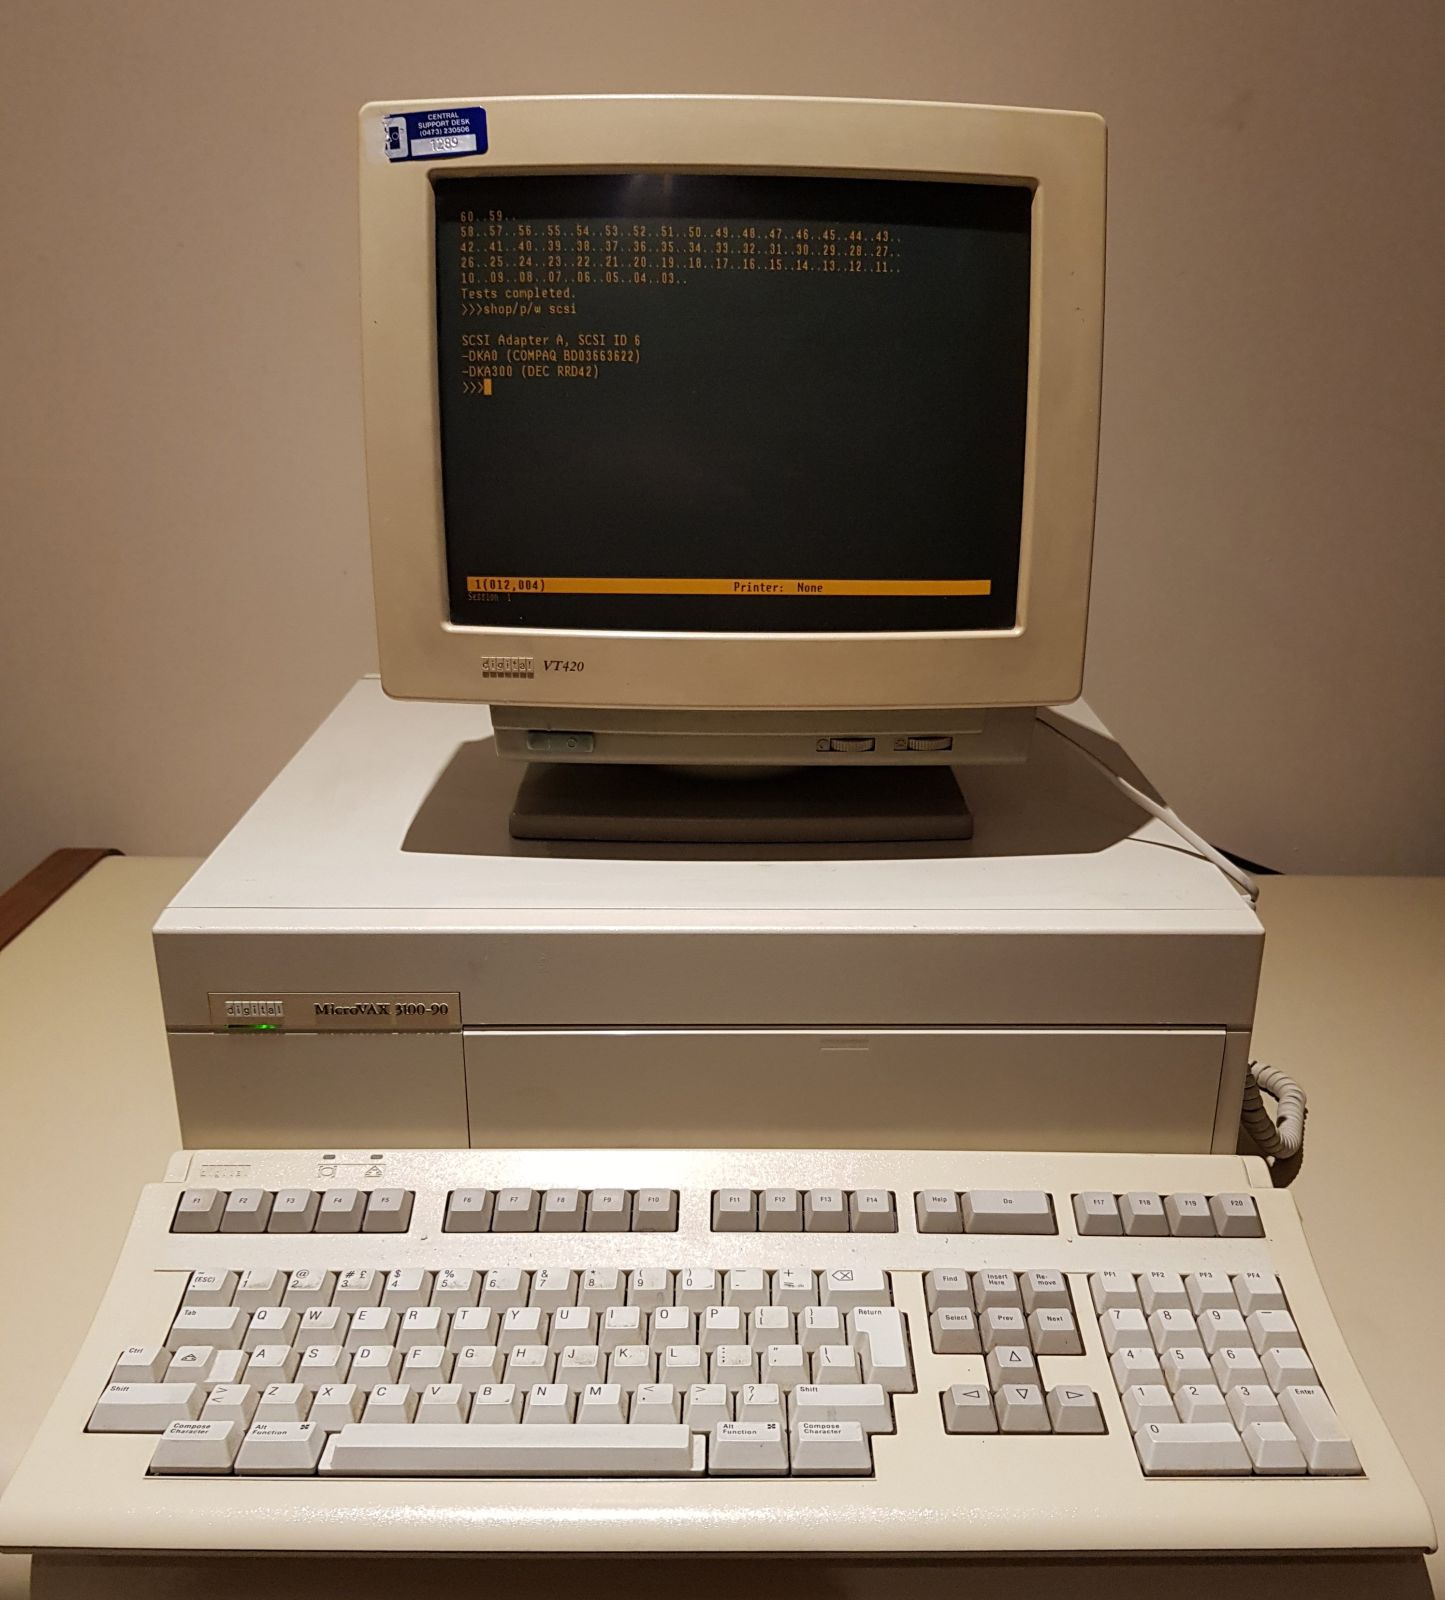 DEC MicroVAX 3100-90 with 64Mb memory, keyboard and VT420 terminal